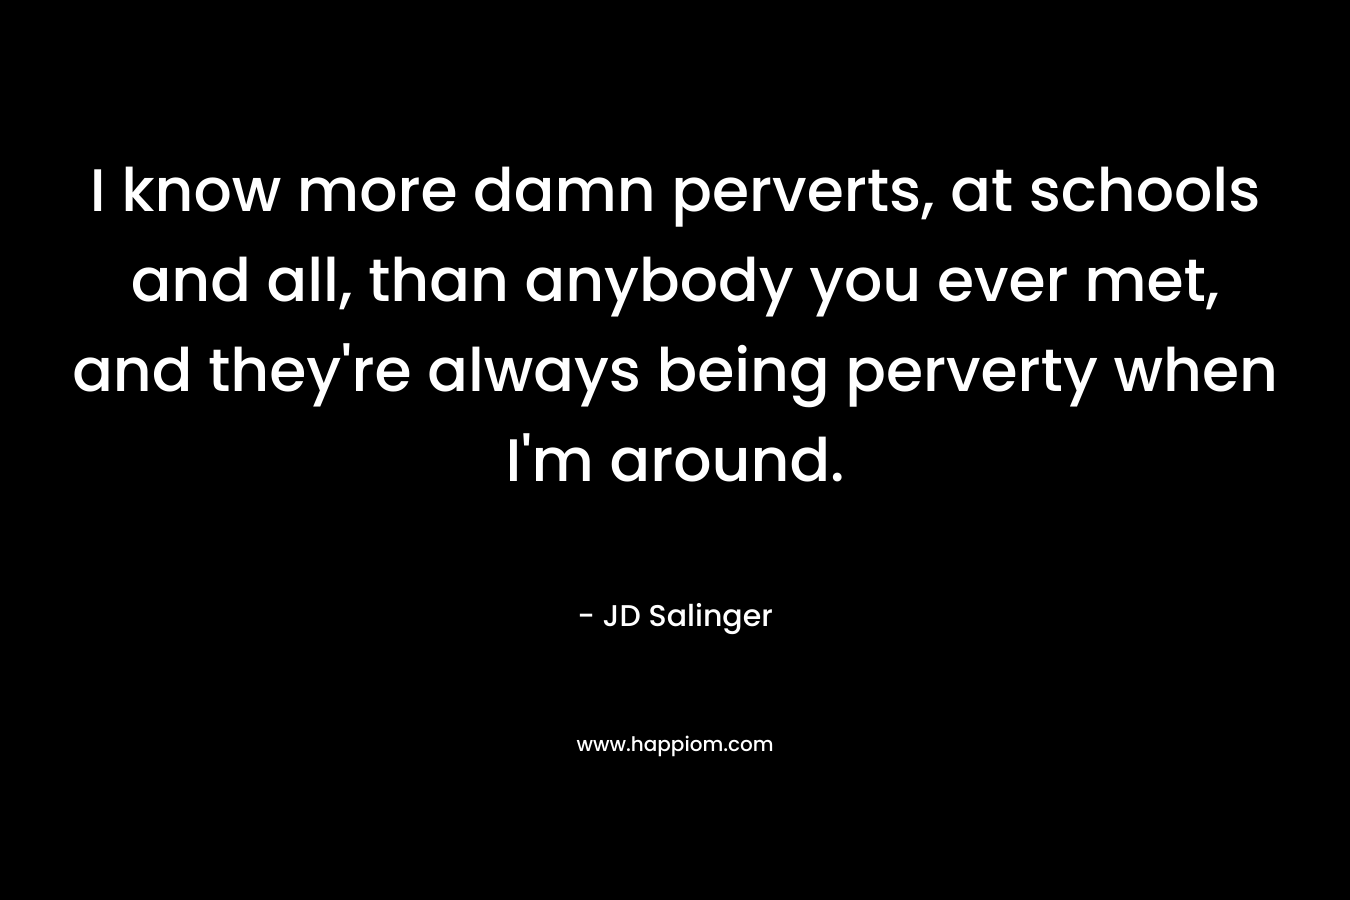 I know more damn perverts, at schools and all, than anybody you ever met, and they’re always being perverty when I’m around. – JD Salinger